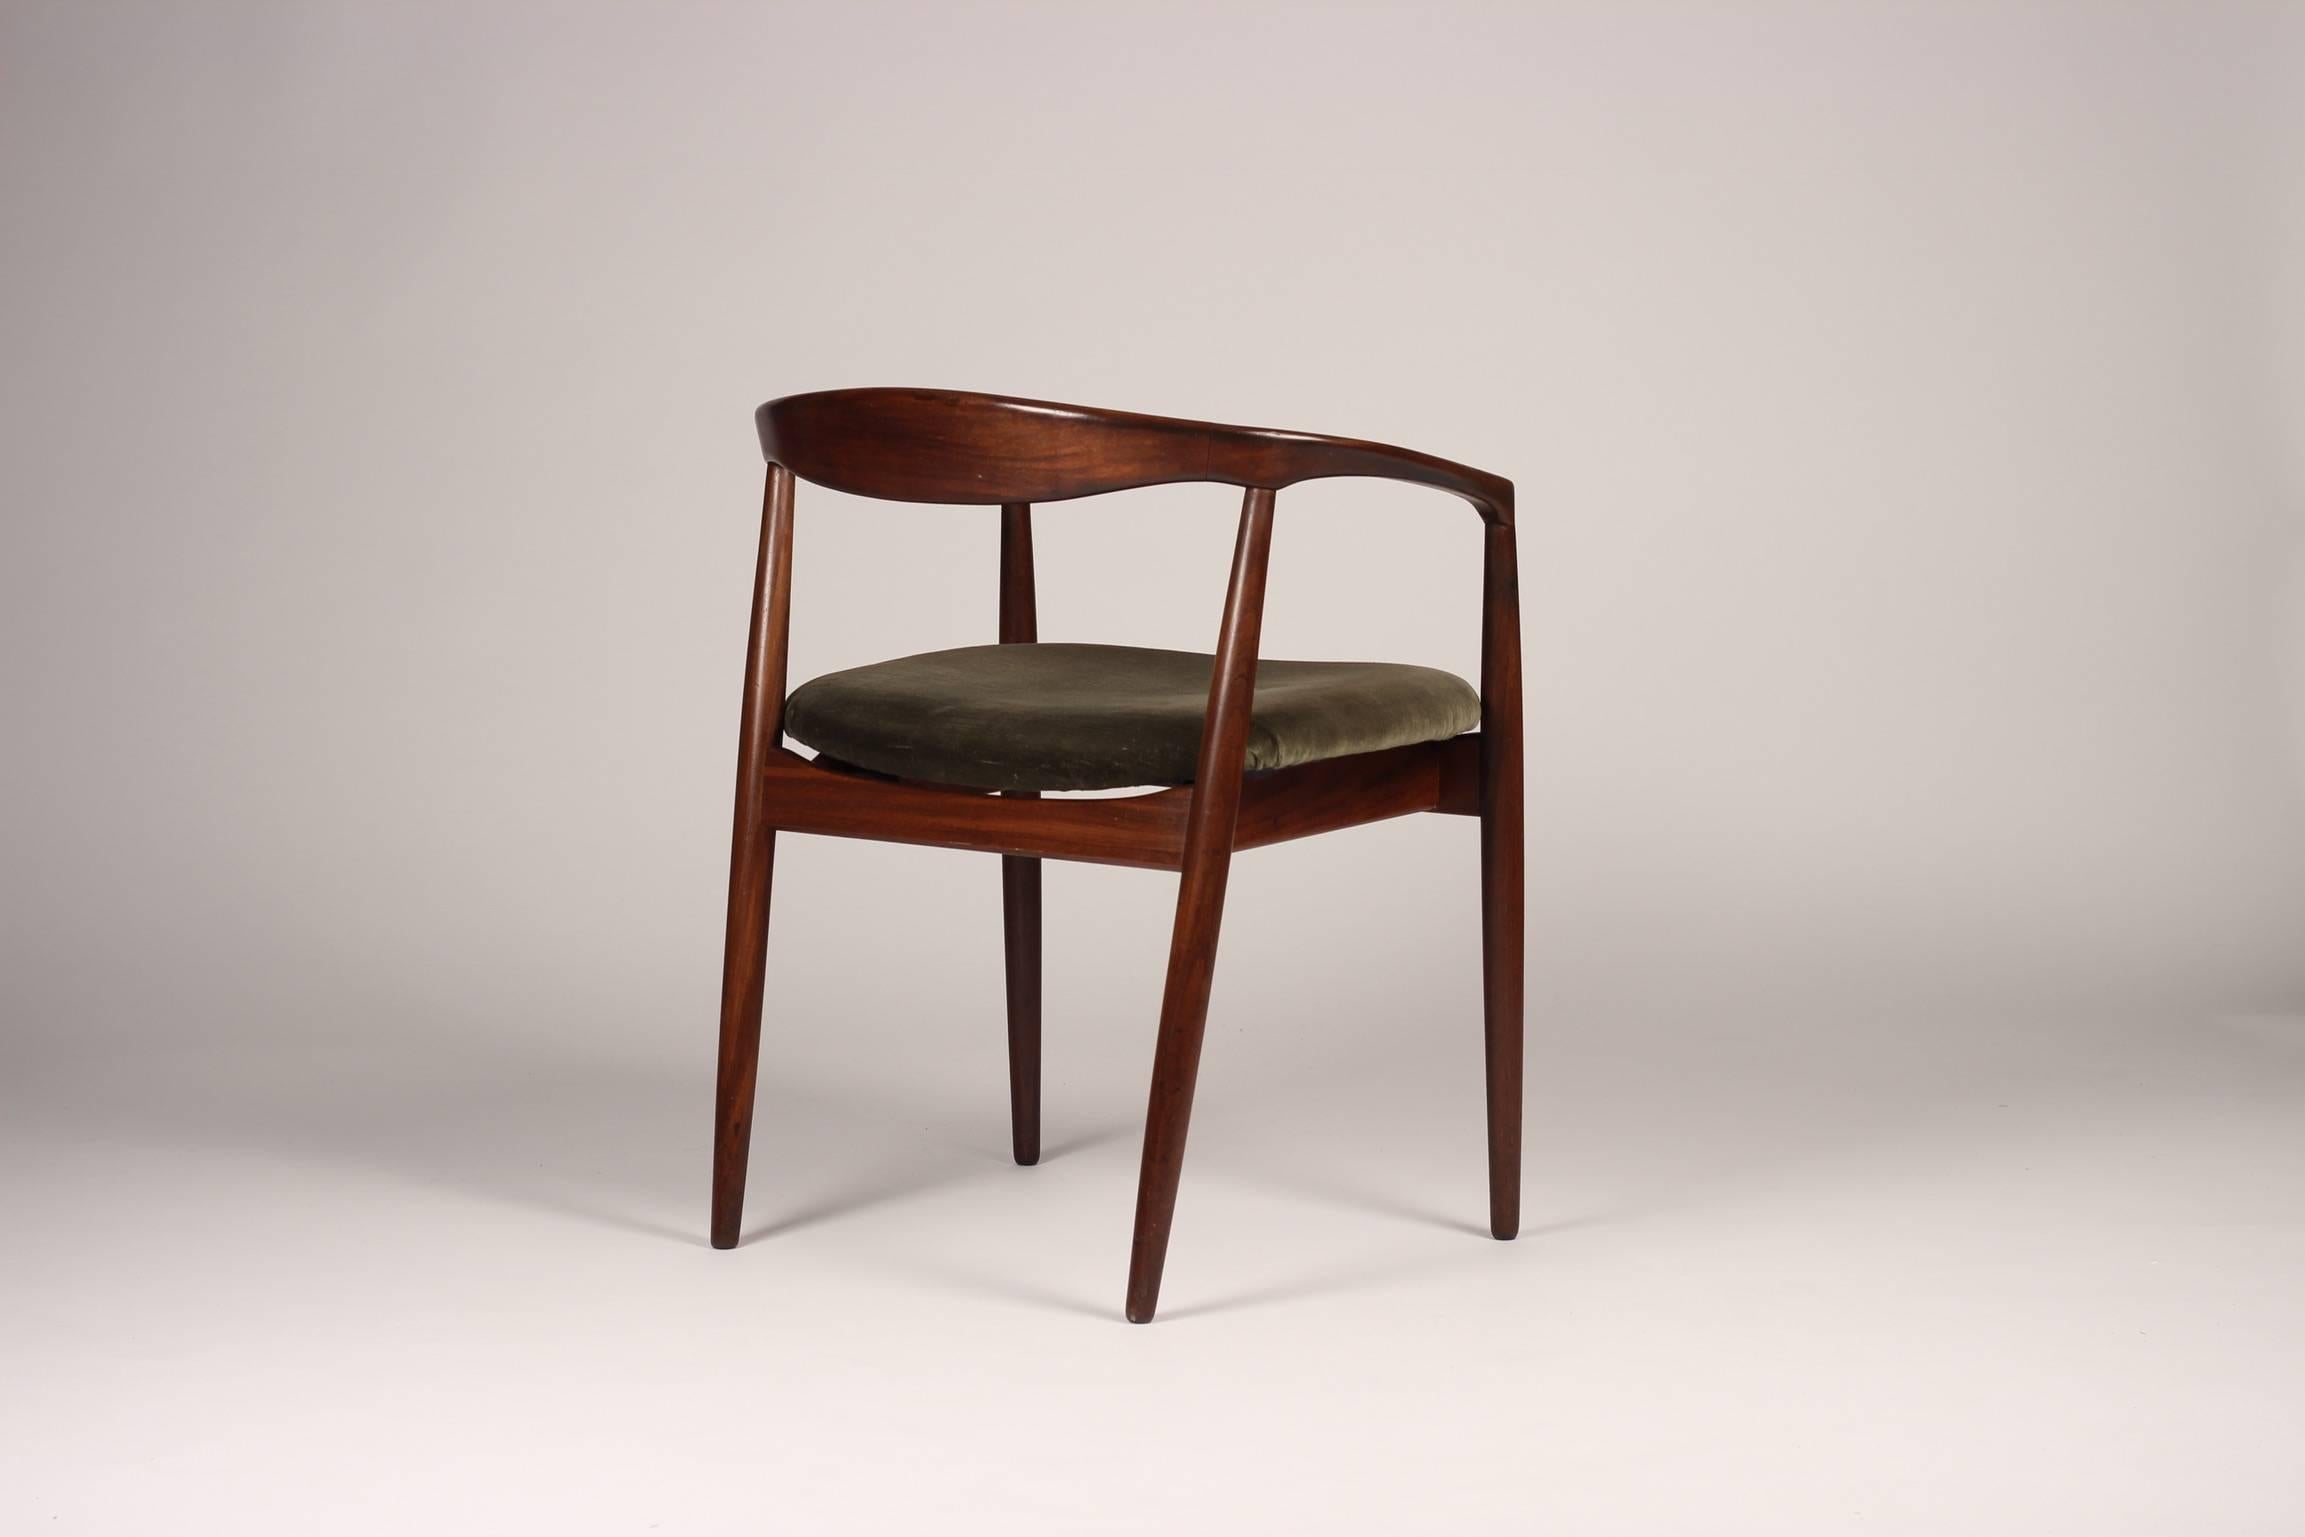 A set of four teak chairs designed by Kai Kristiansen and manufactured by Magnus Olesen in Denmark in the 1960s. The arms of this curved, round back chair bear similarities to the Paper Knife chair also by Kai Kristiansen. This model is the Troja